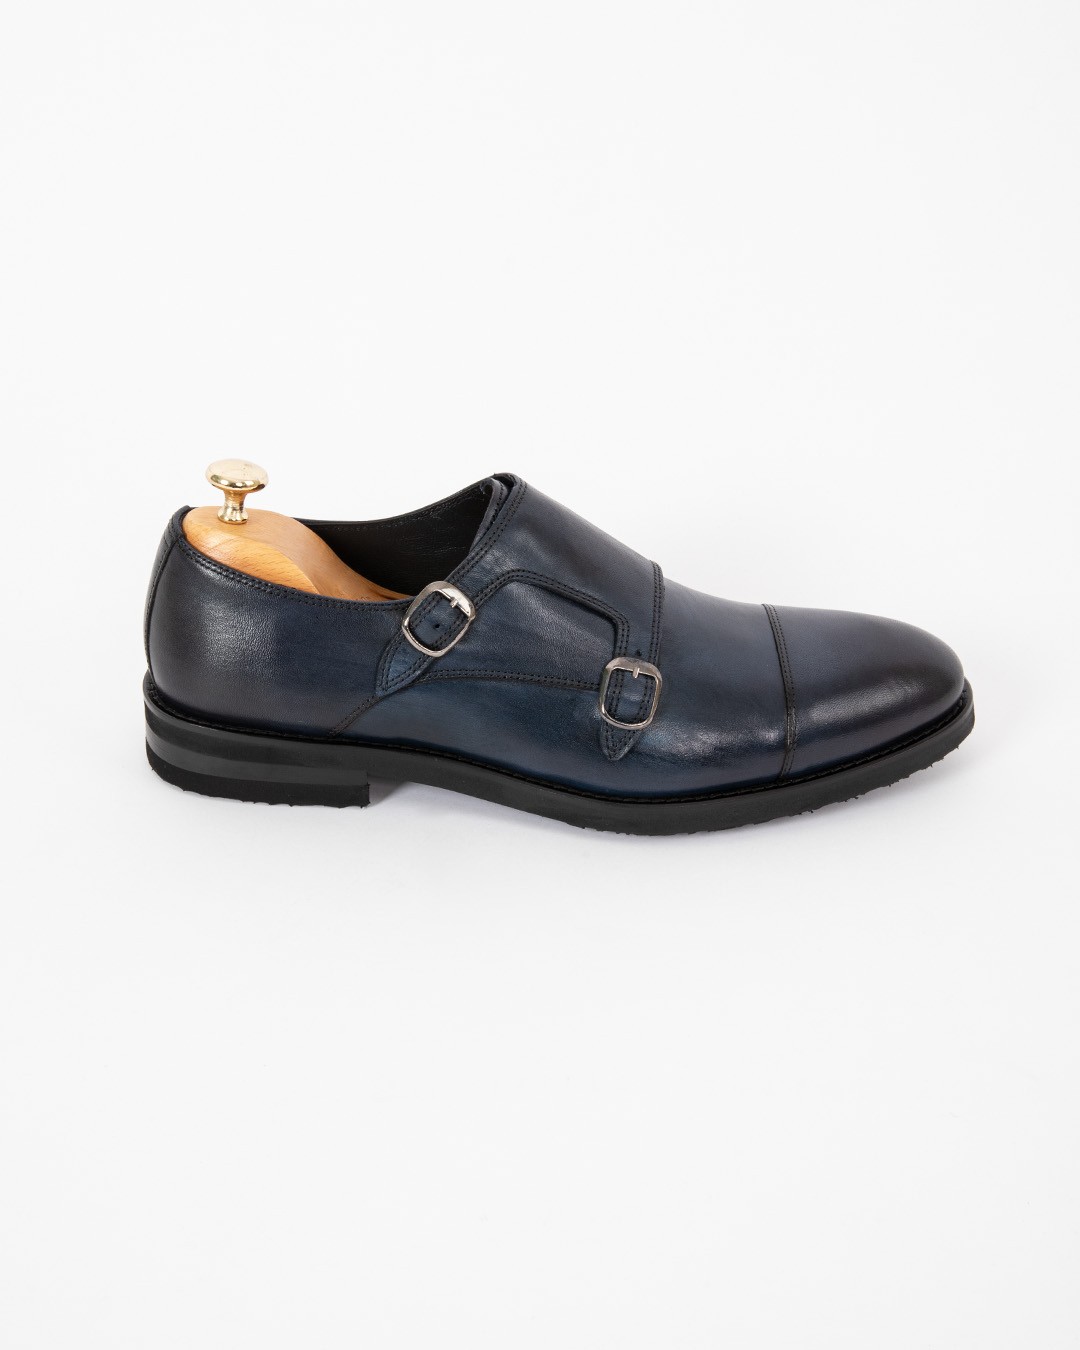 Buckled Shoes - Navy Blue